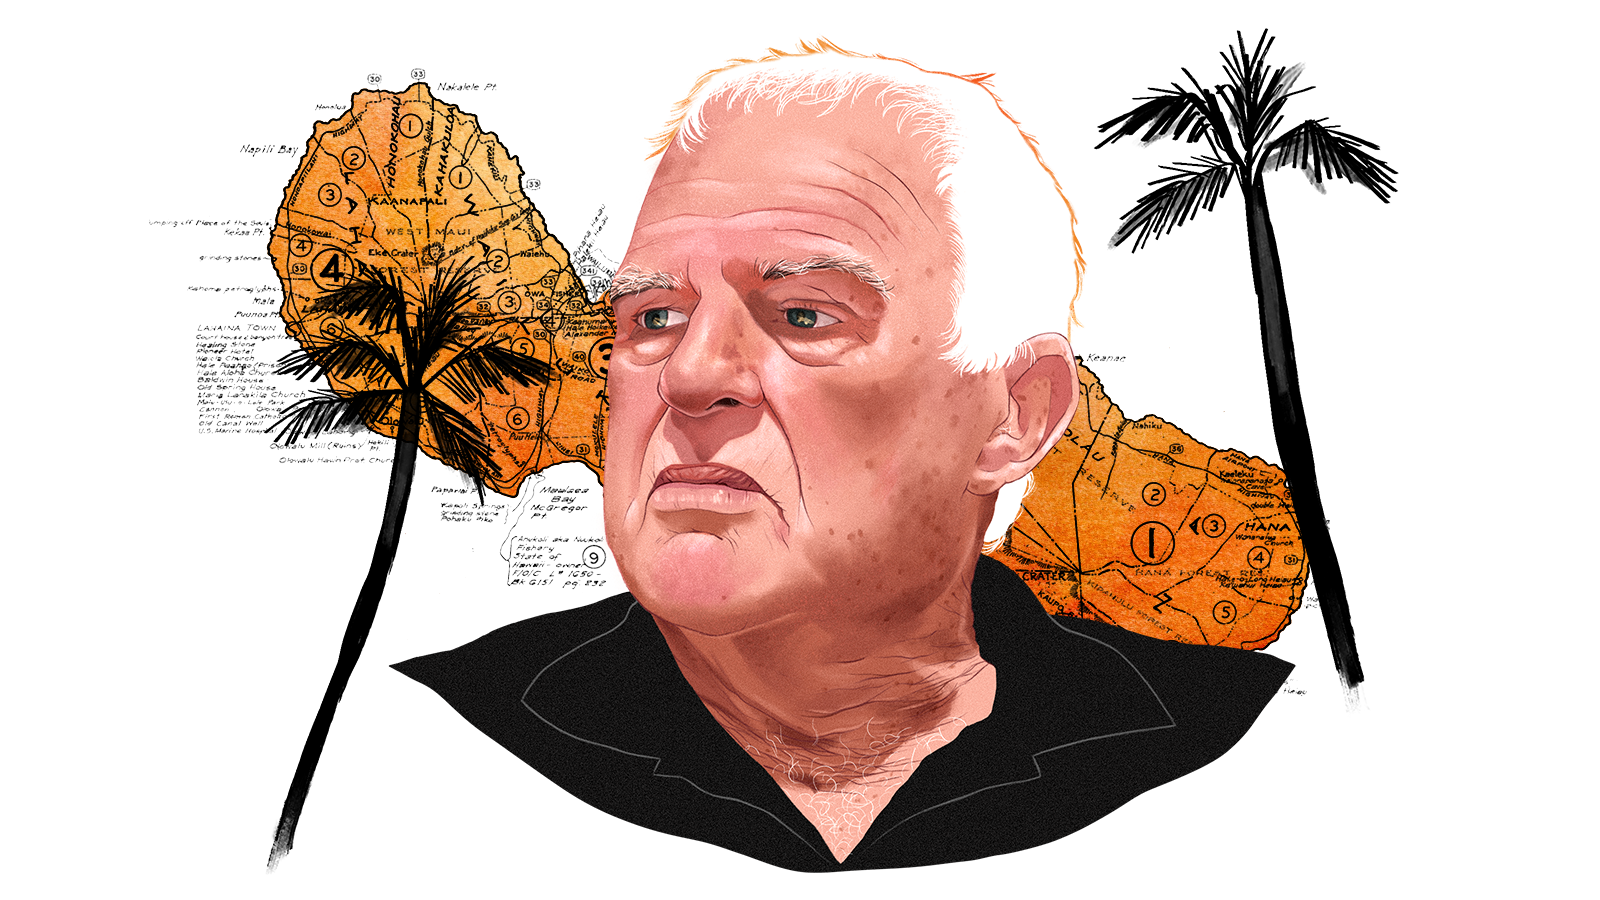 Illustrated portrait of a white man in his 70s (Peter Martin) with an orange map of Maui and black palm trees in the background